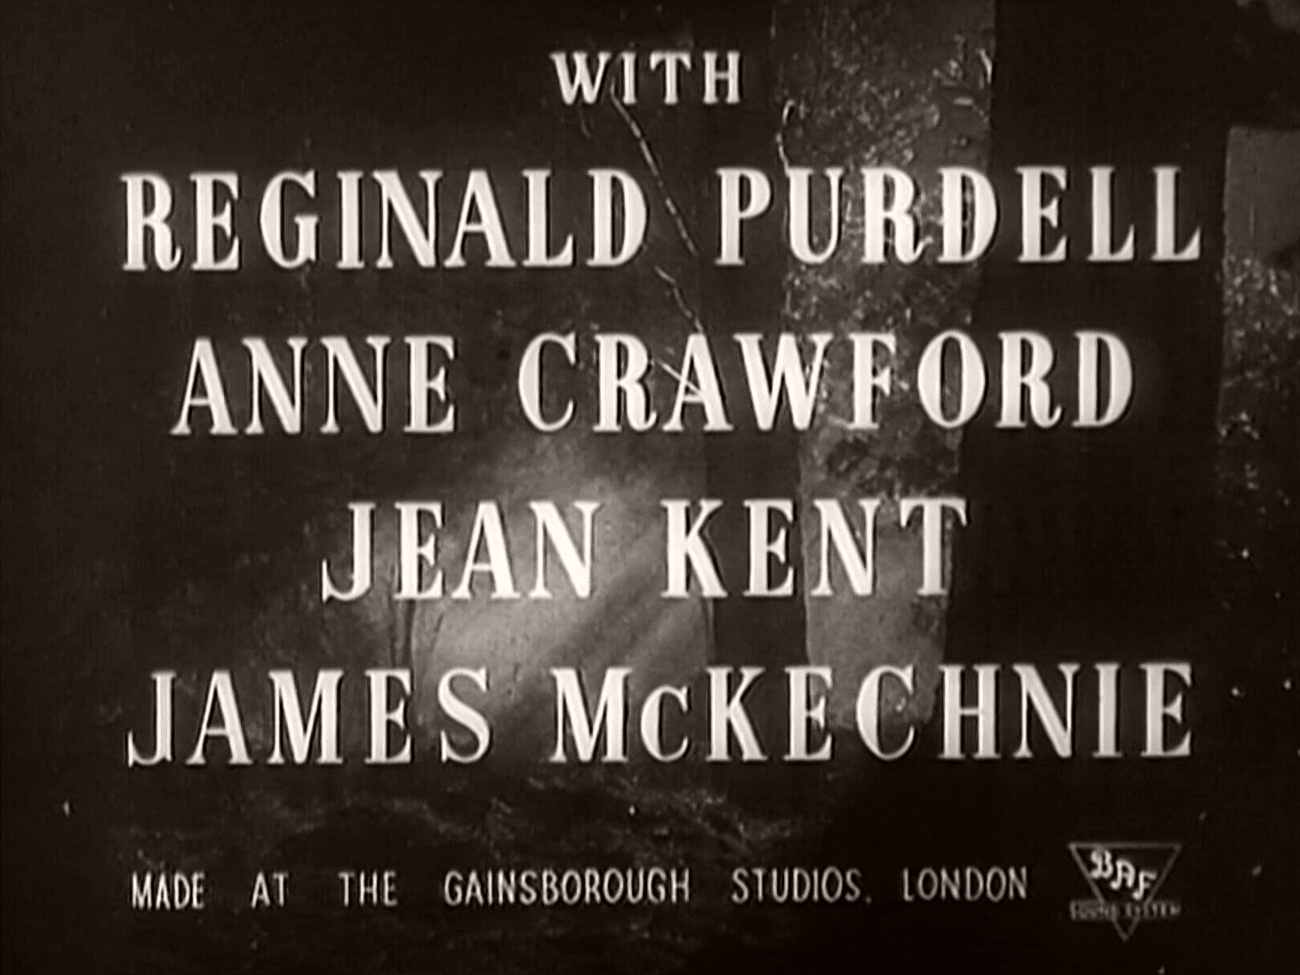 Main title from Two Thousand Women (1944) (3). With Reginald Purdell, Anne Crawford, Jean Kent, James McKechnie